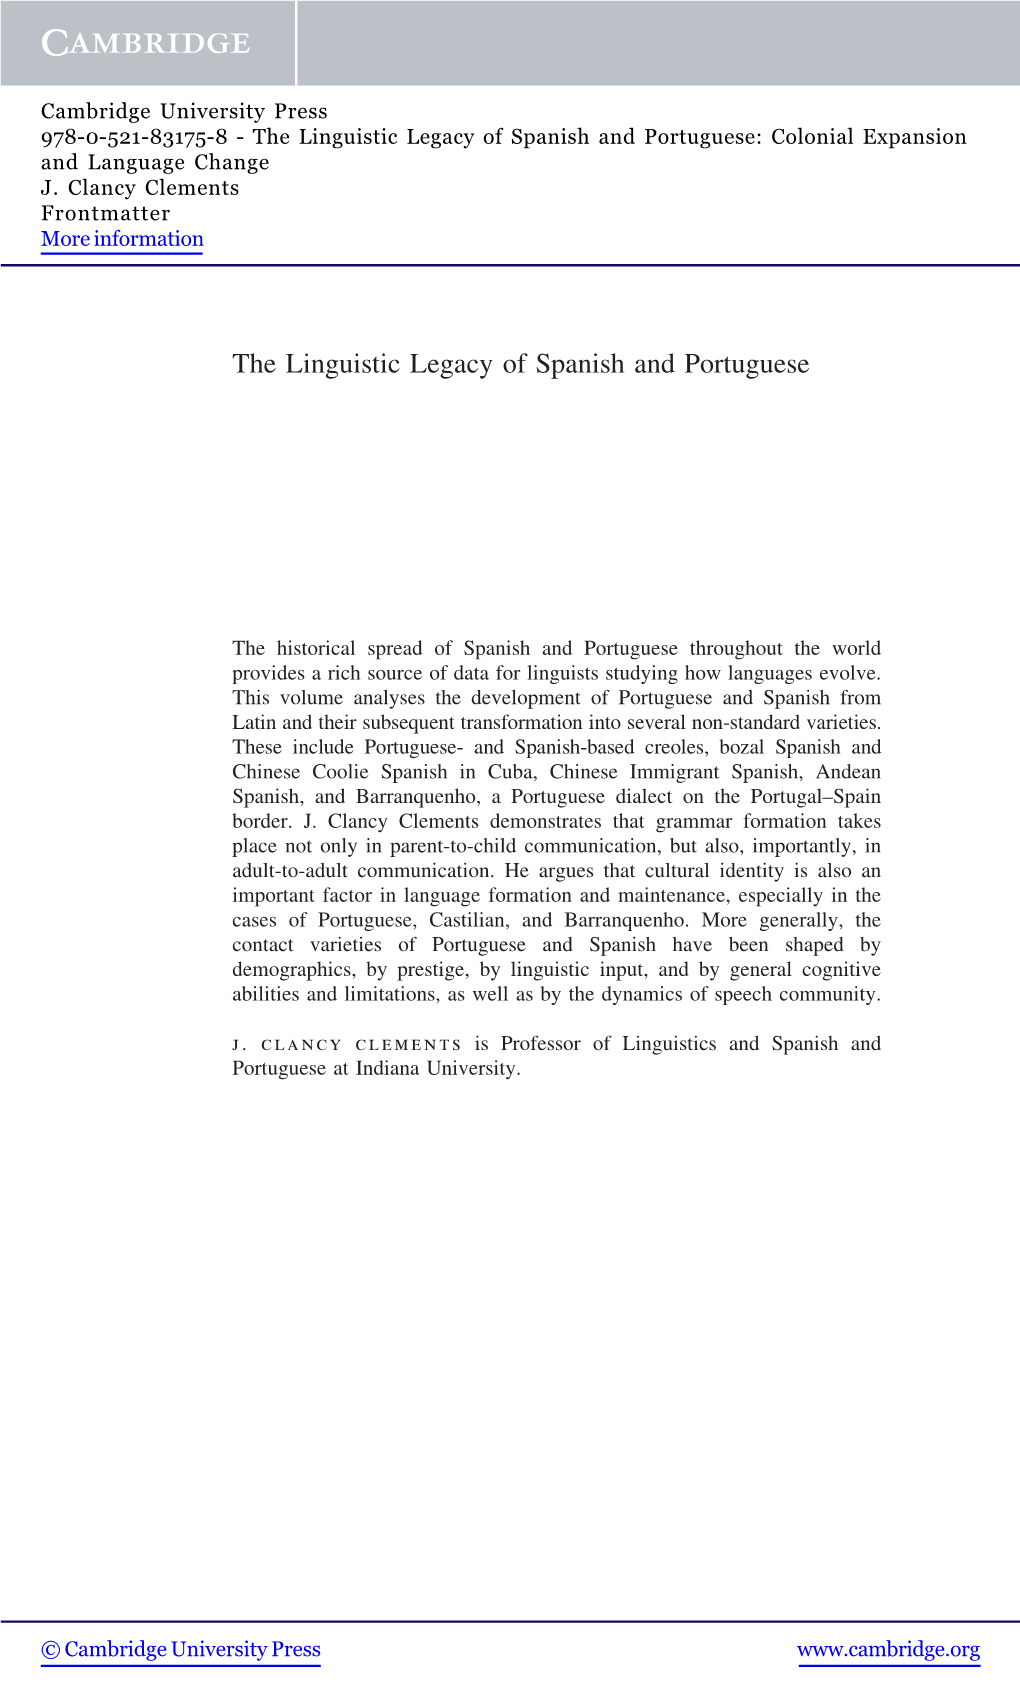 The Linguistic Legacy of Spanish and Portuguese: Colonial Expansion and Language Change J